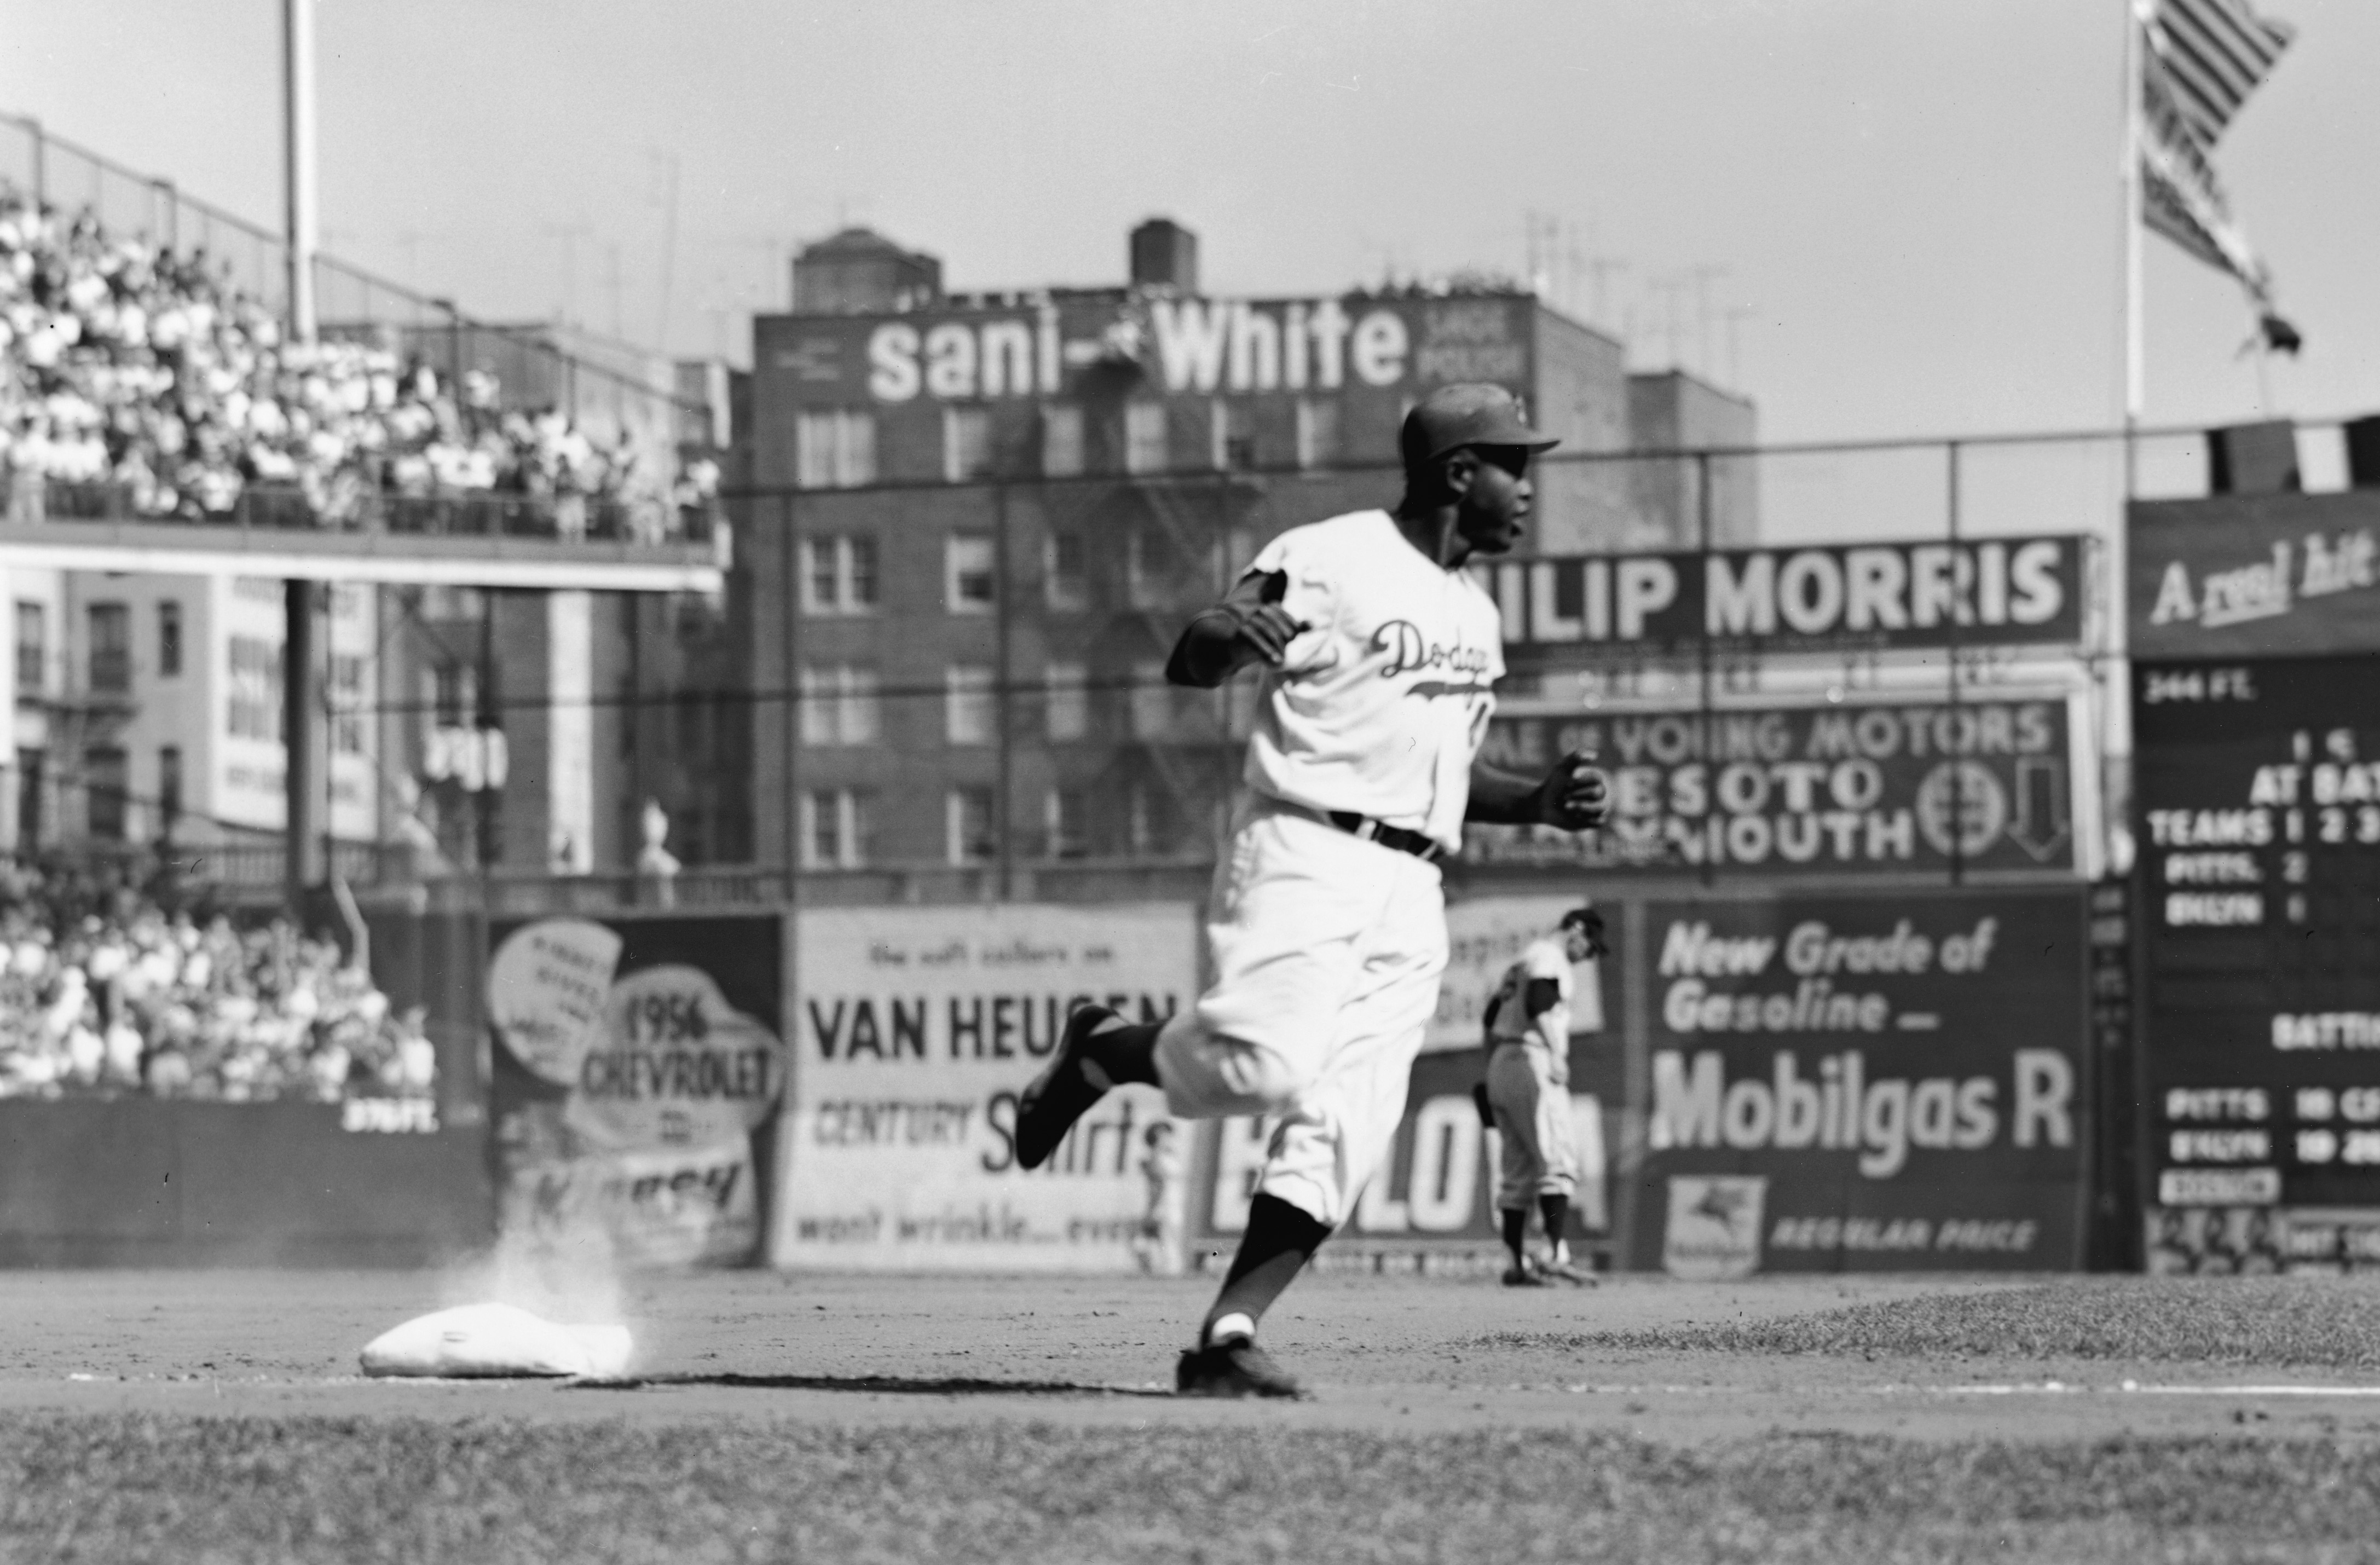 A photo of Jackie Robinson rounding the bases at New York's Ebbets Field in the 1950s.